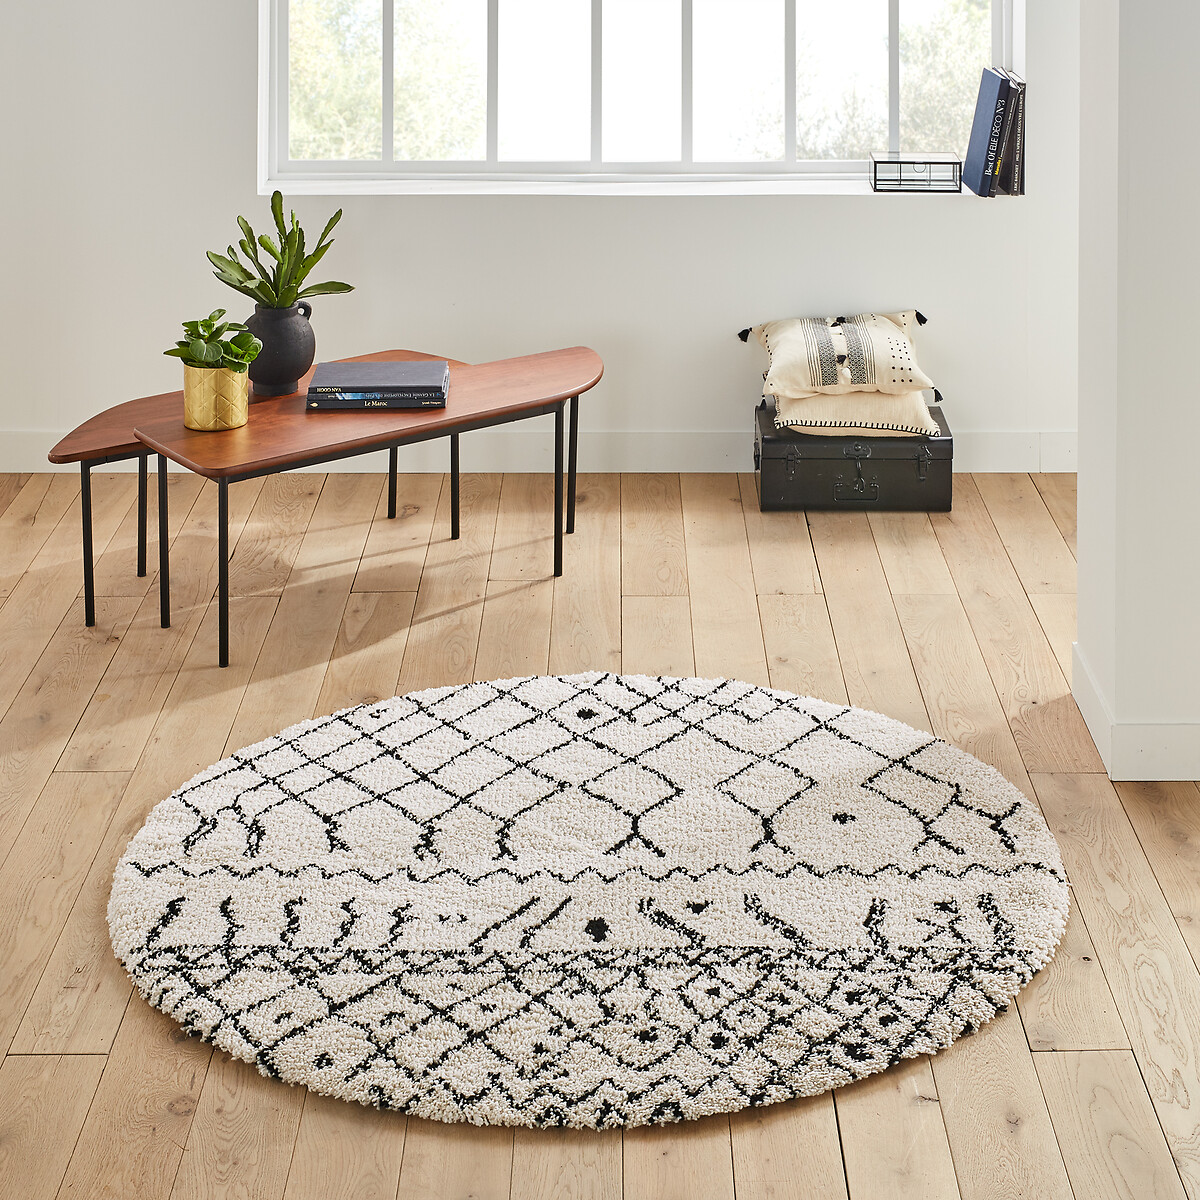 Afaw Berber Style Round Rug